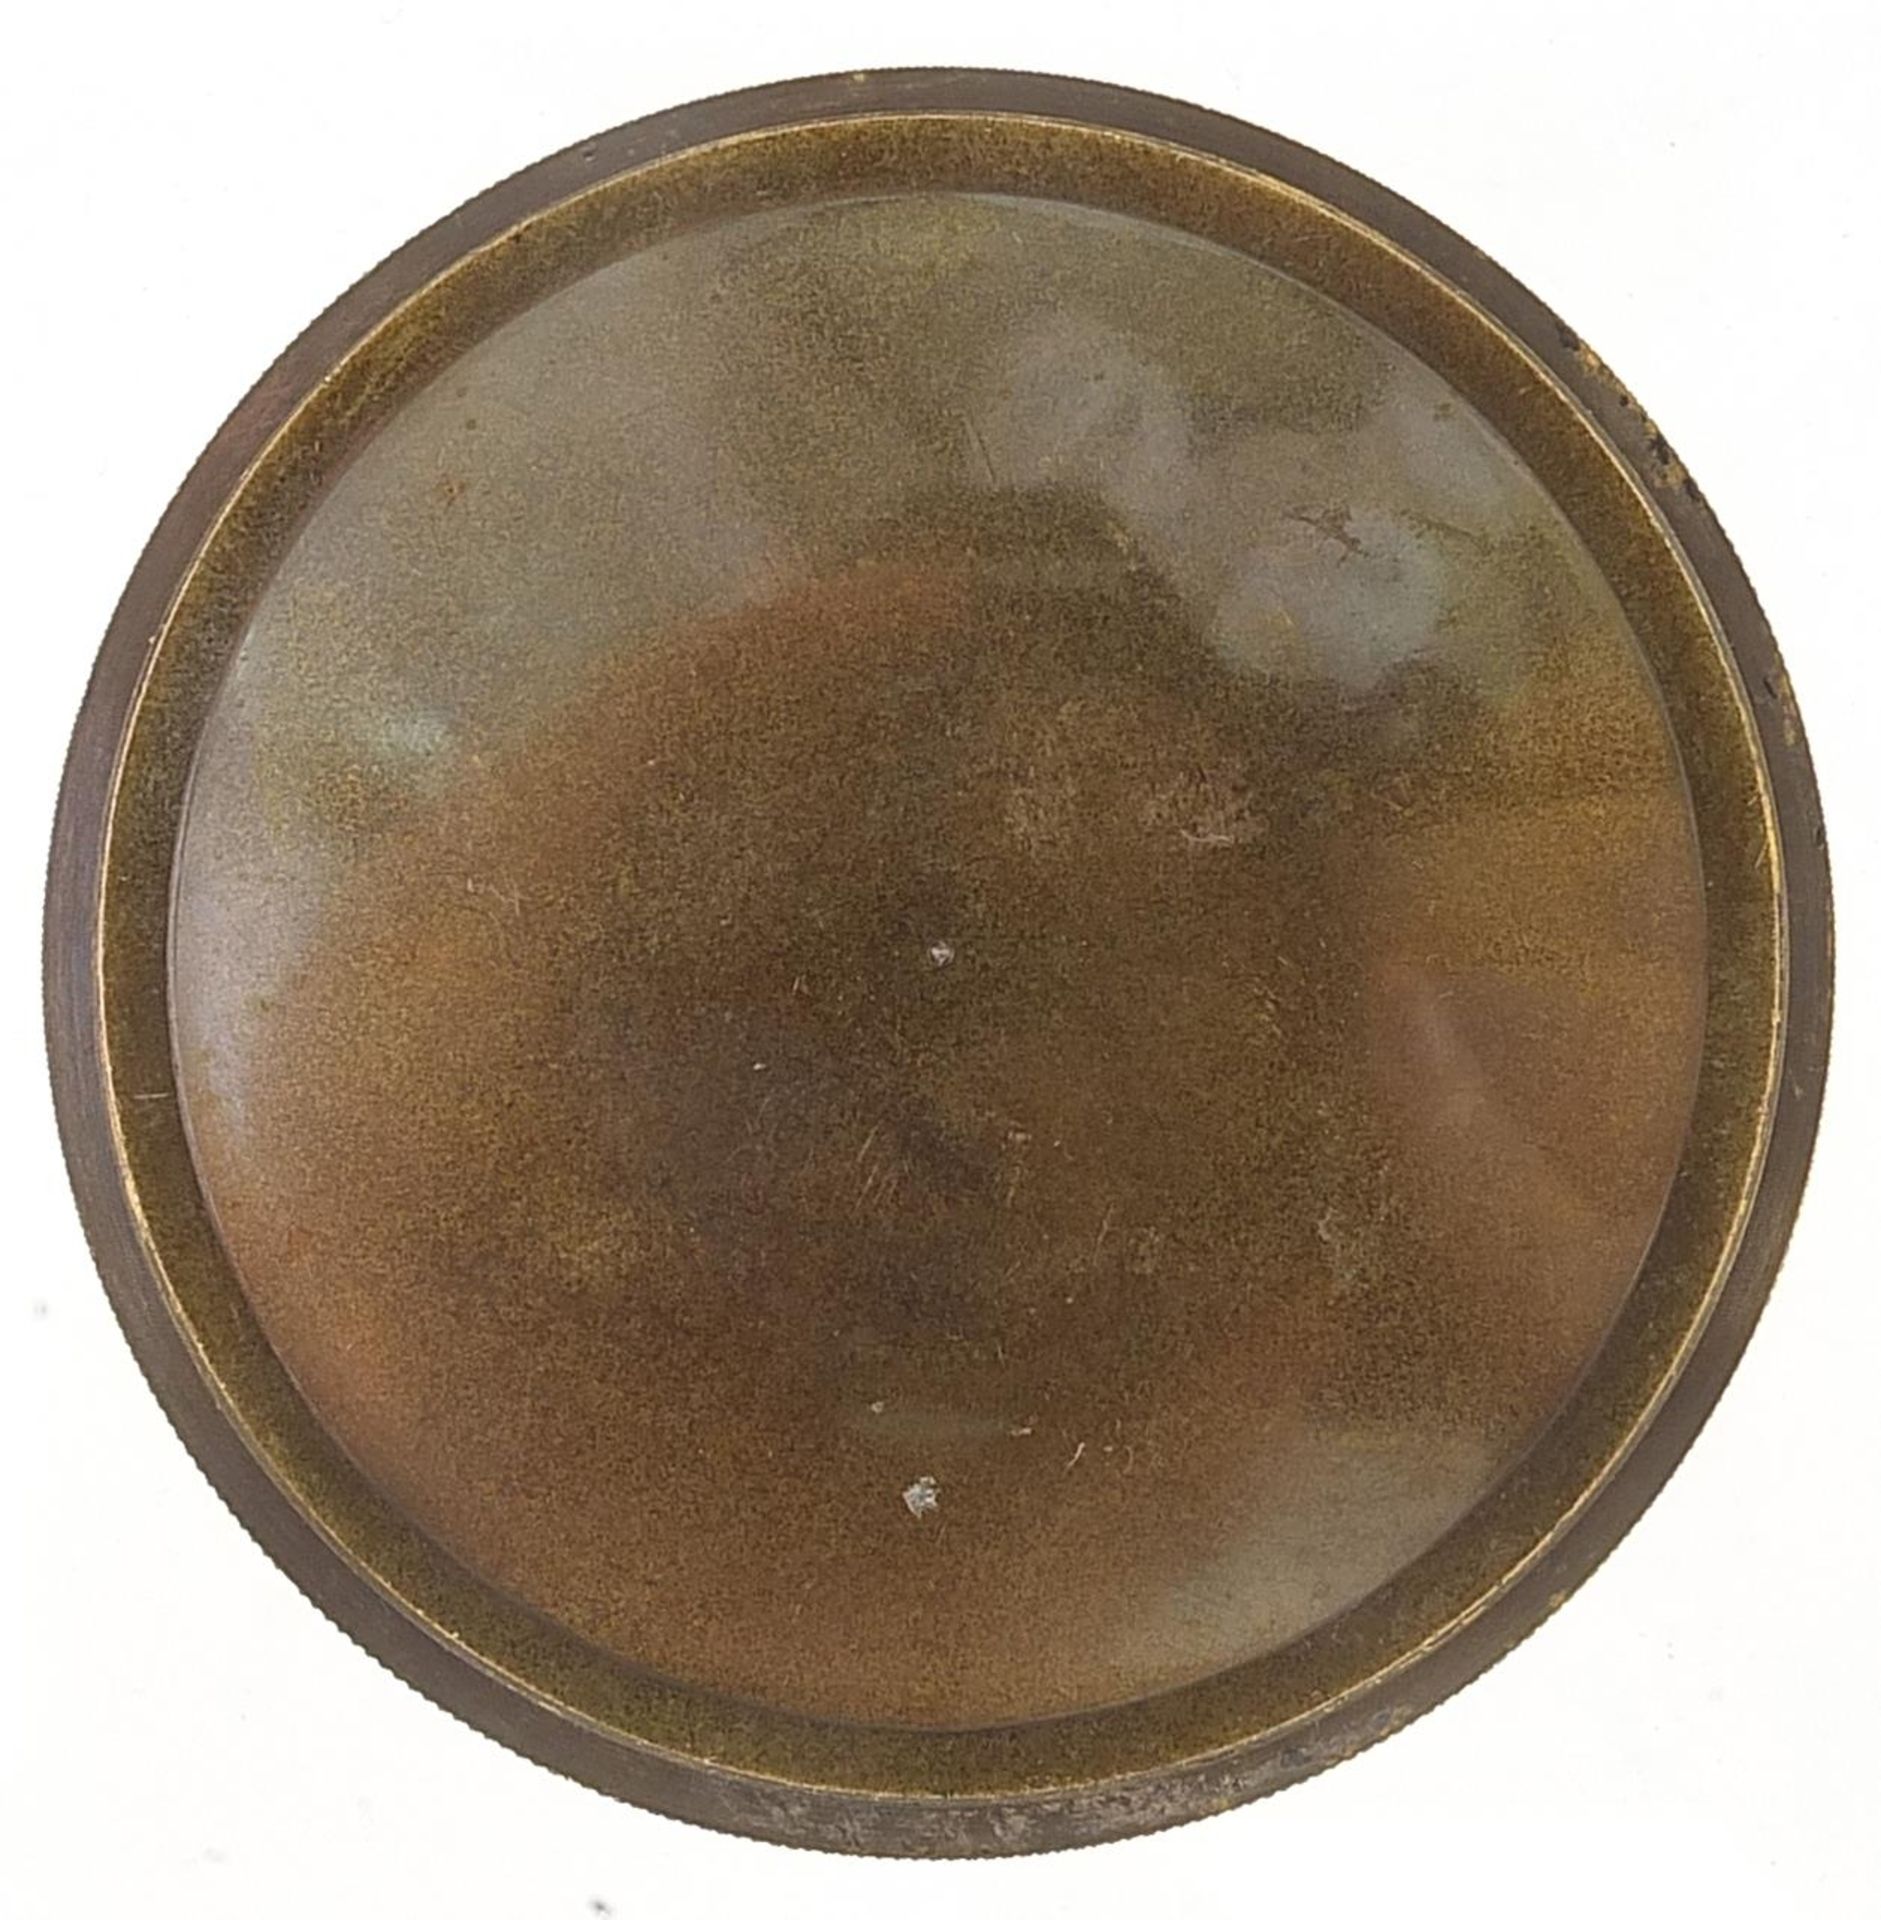 Military interest brass travelling compass, 7.5cm in diameter - Image 3 of 3